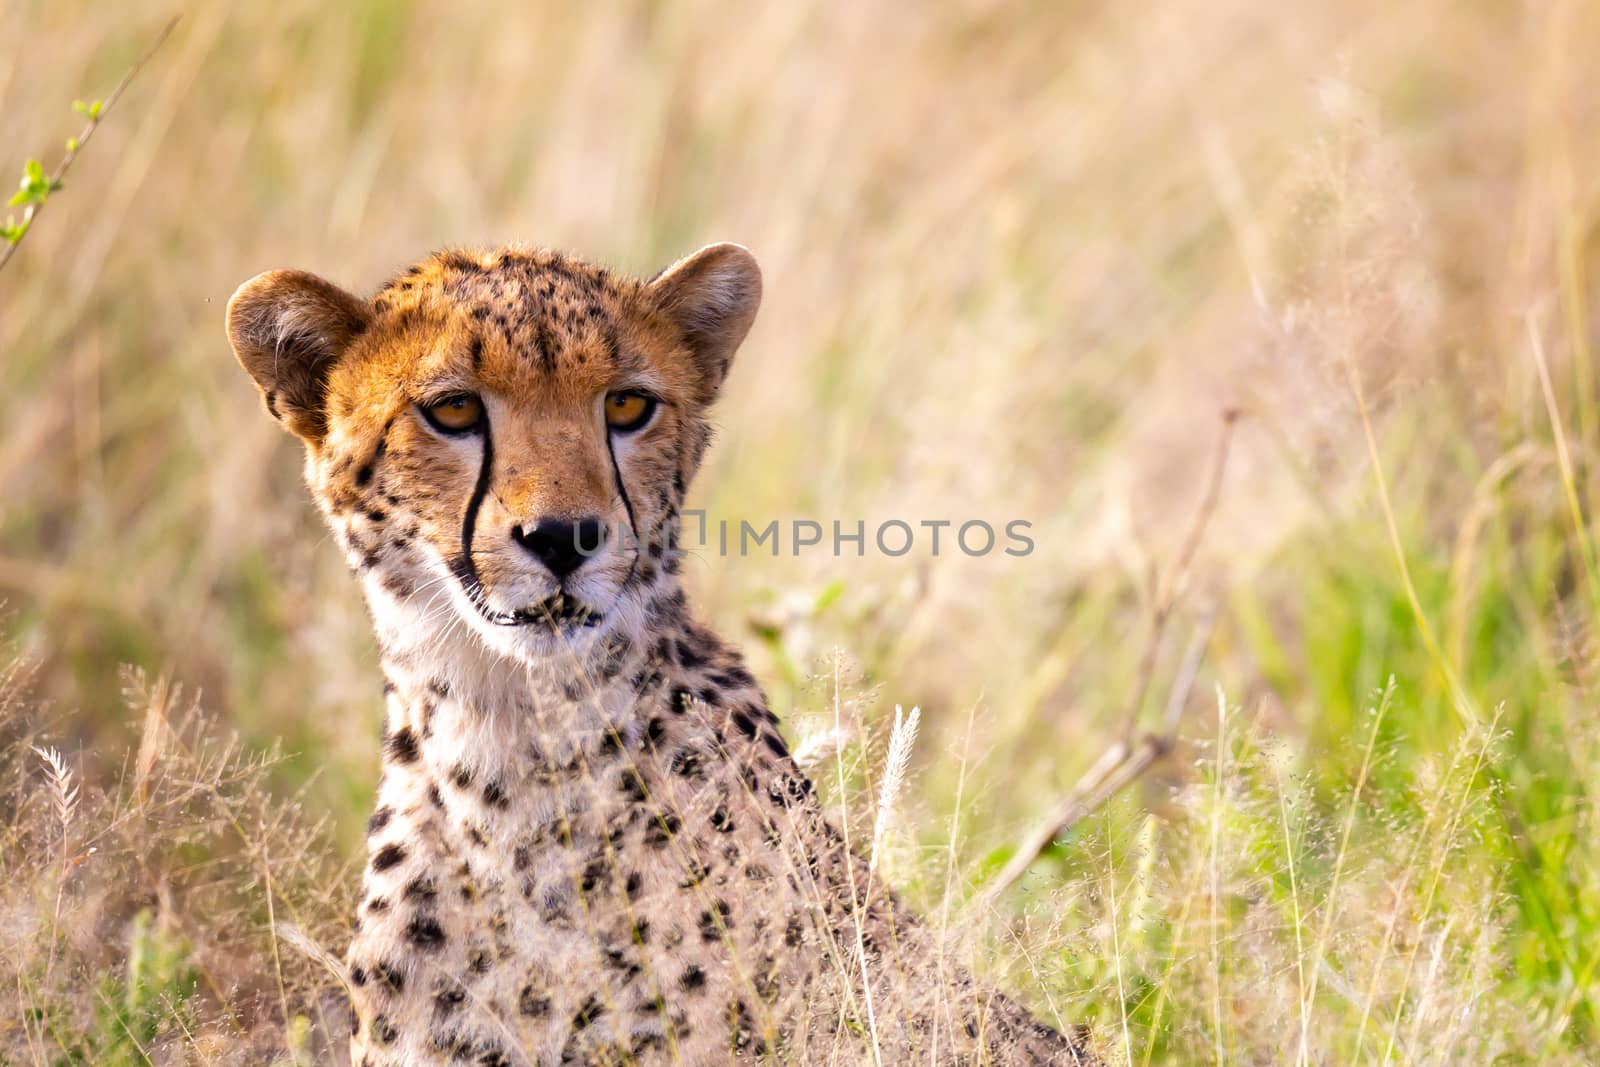 A portrait of a cheetah in the grass landscape by 25ehaag6